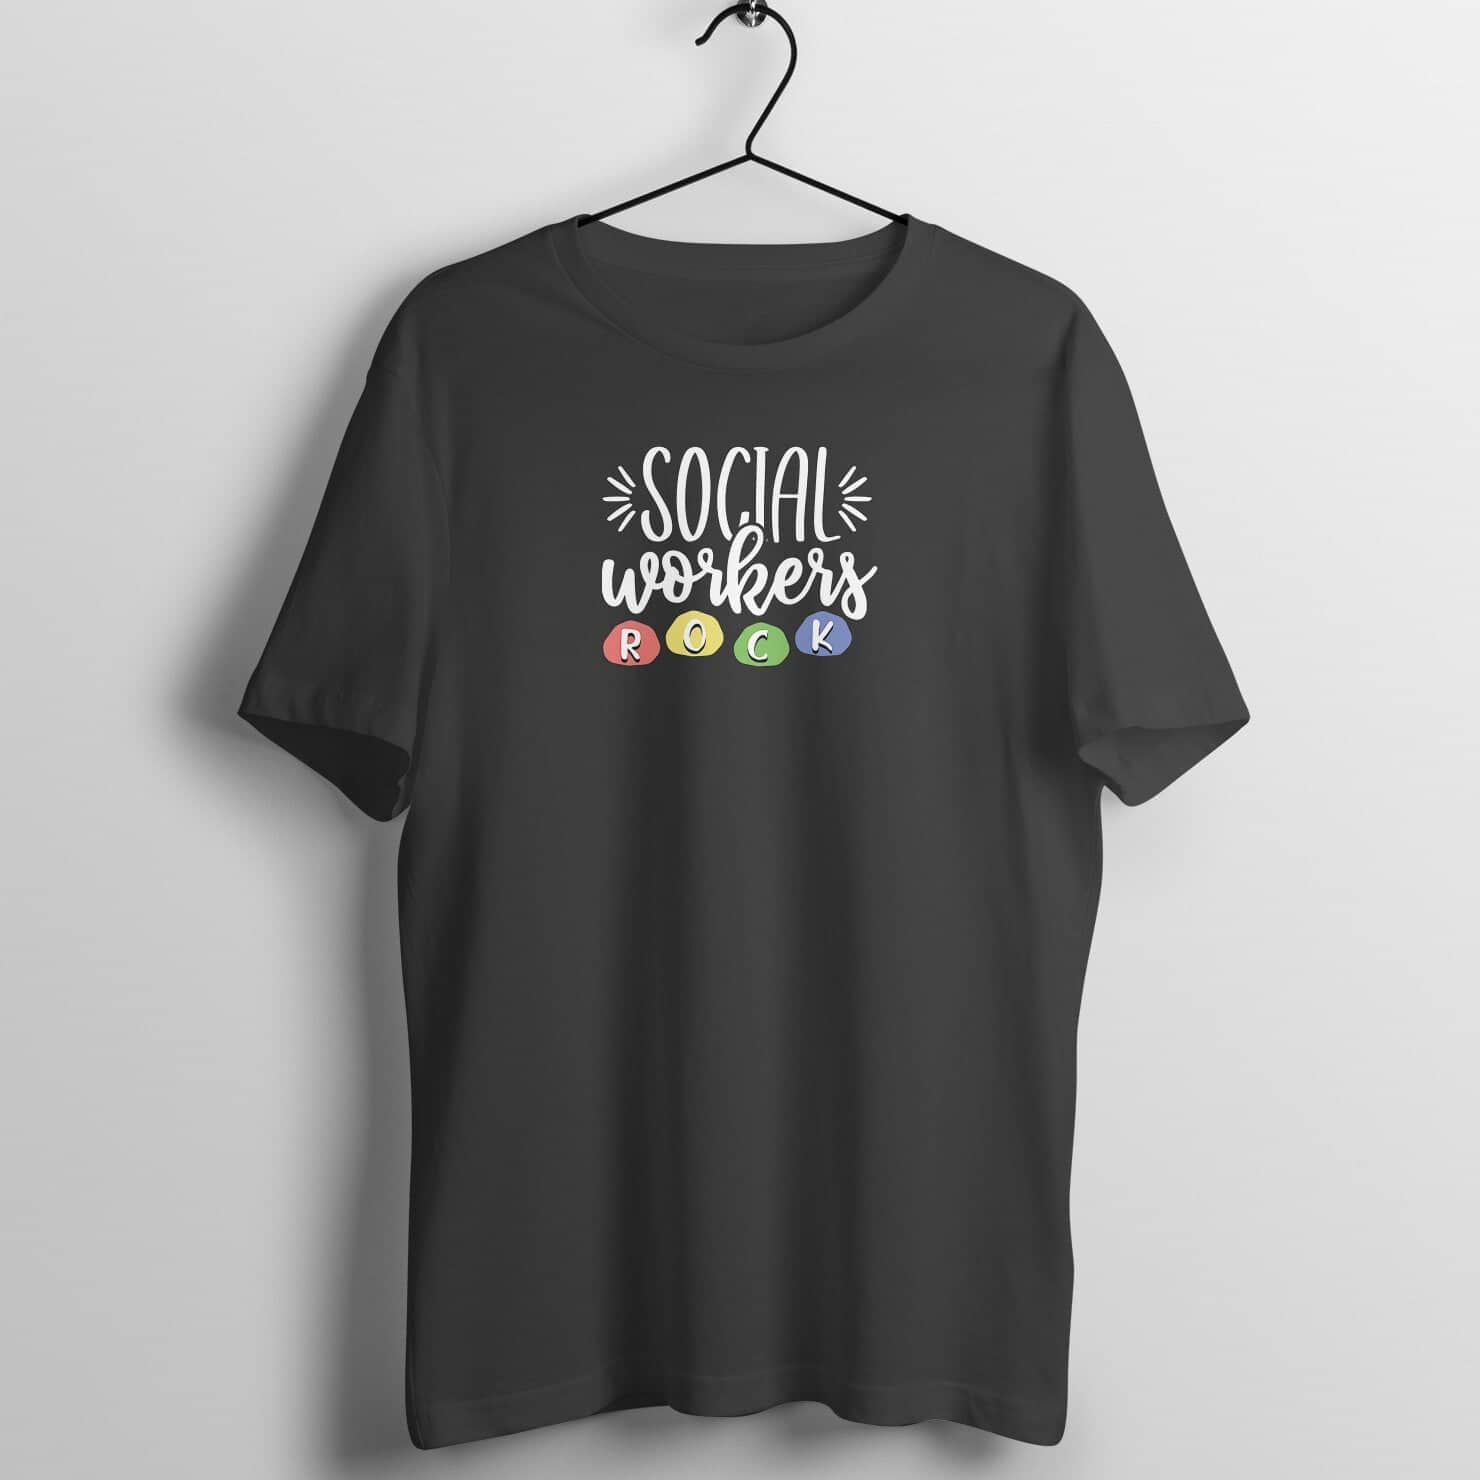 Social Workers Rock Exclusive Real Life Heroes Black T Shirt for Women and Men freeshipping - Catch My Drift India